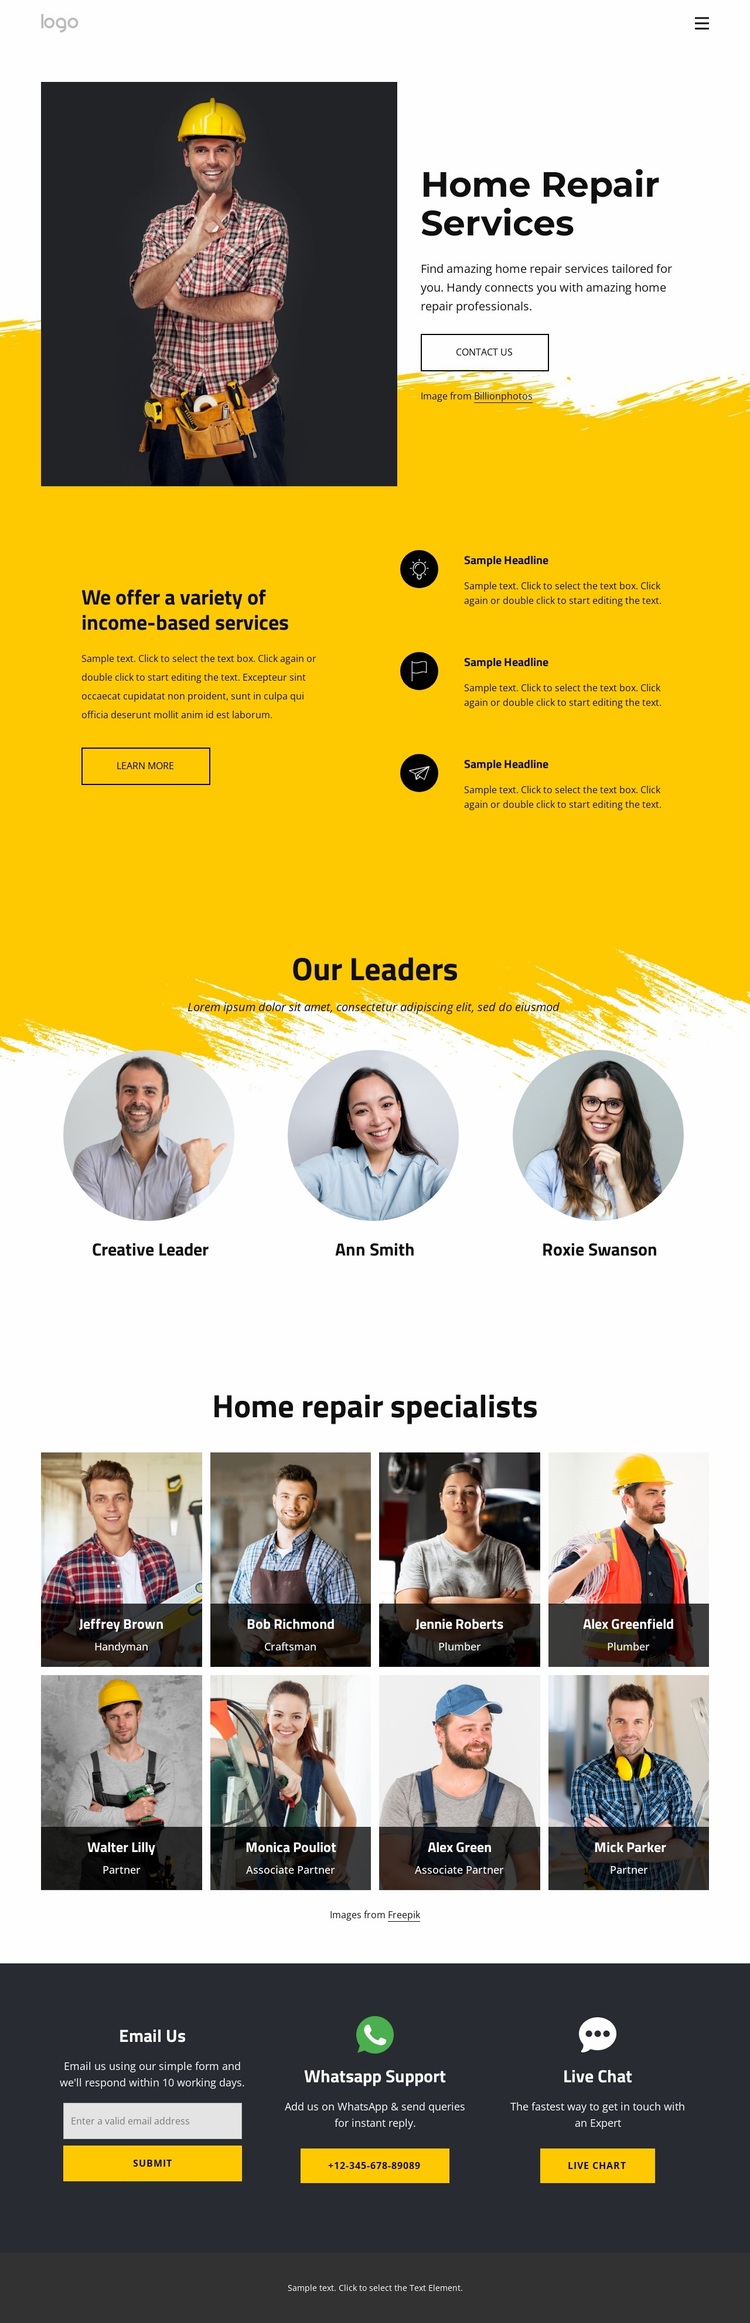 Find home repair services today Website Design